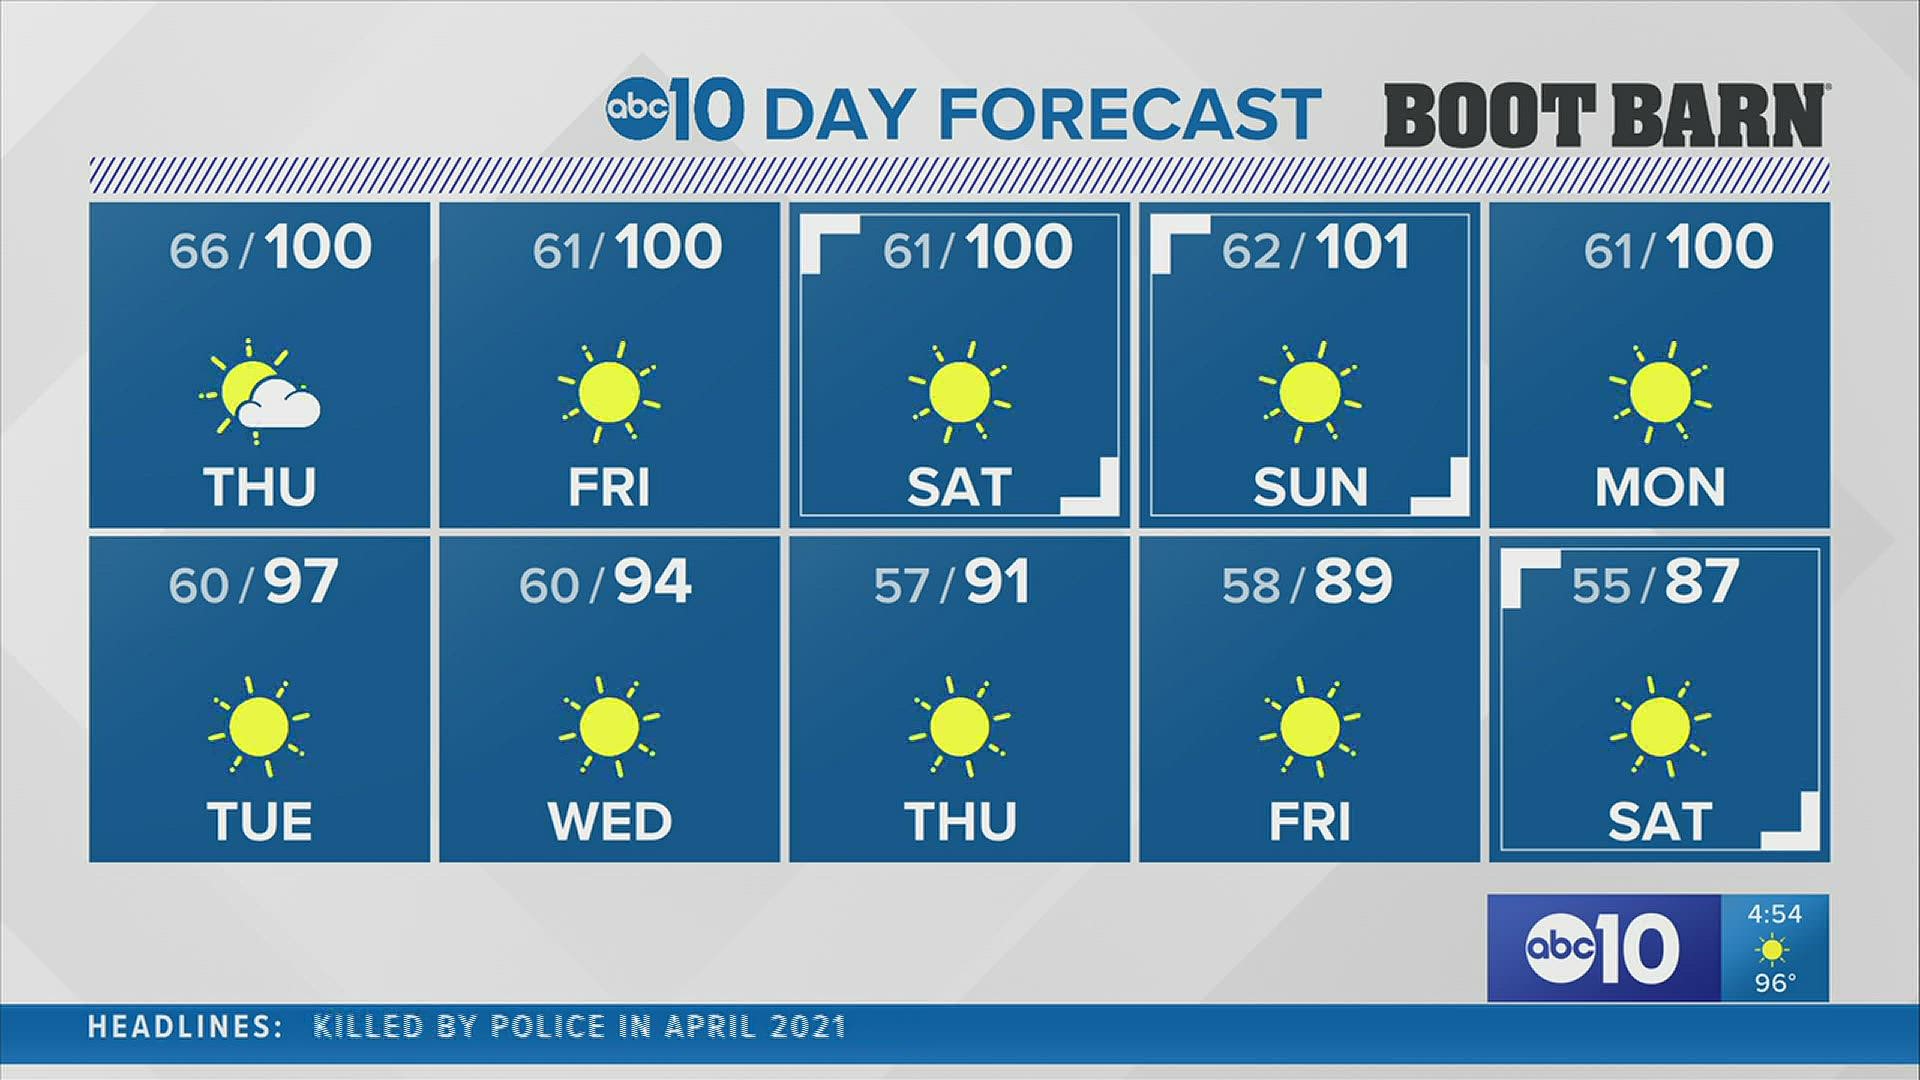 Our Carley Gomez shows us what the next 10 days of weather will look like.